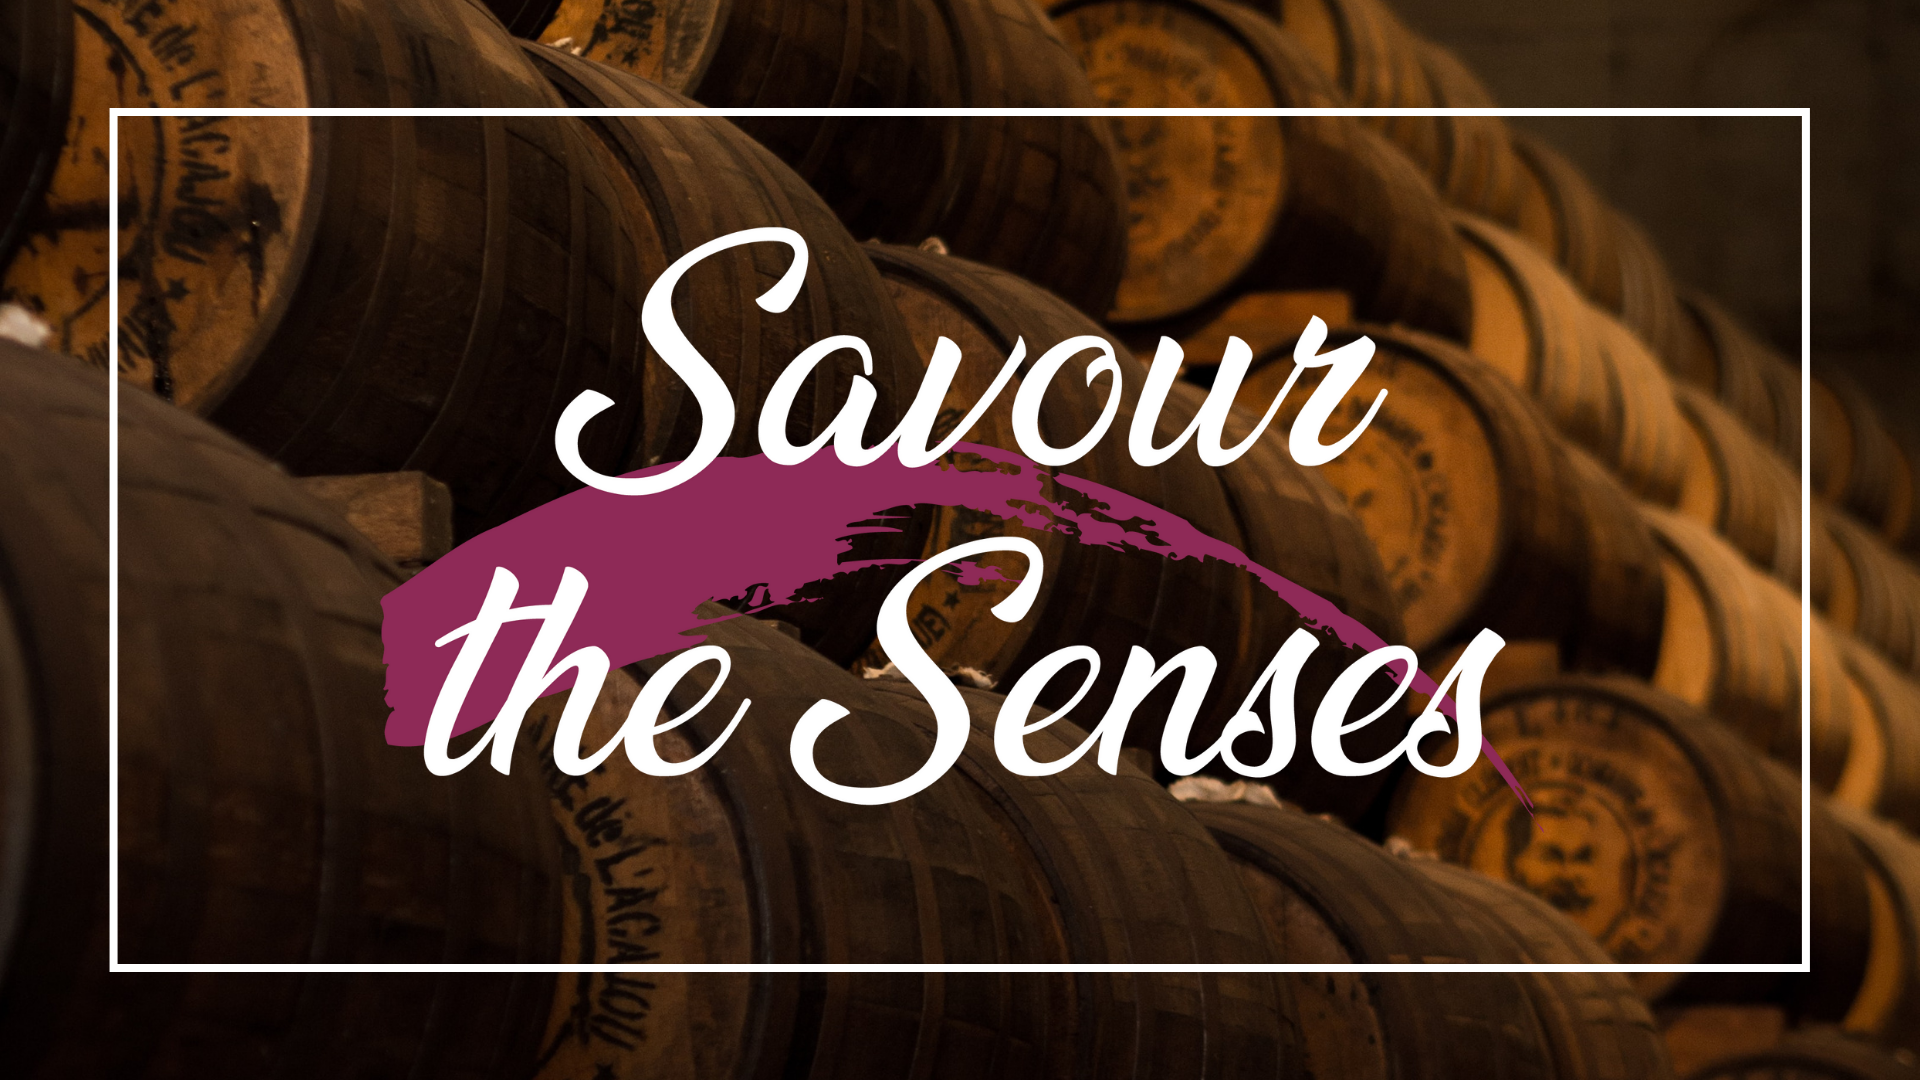 Savour the Senses online with chocolate, wine and moonshine